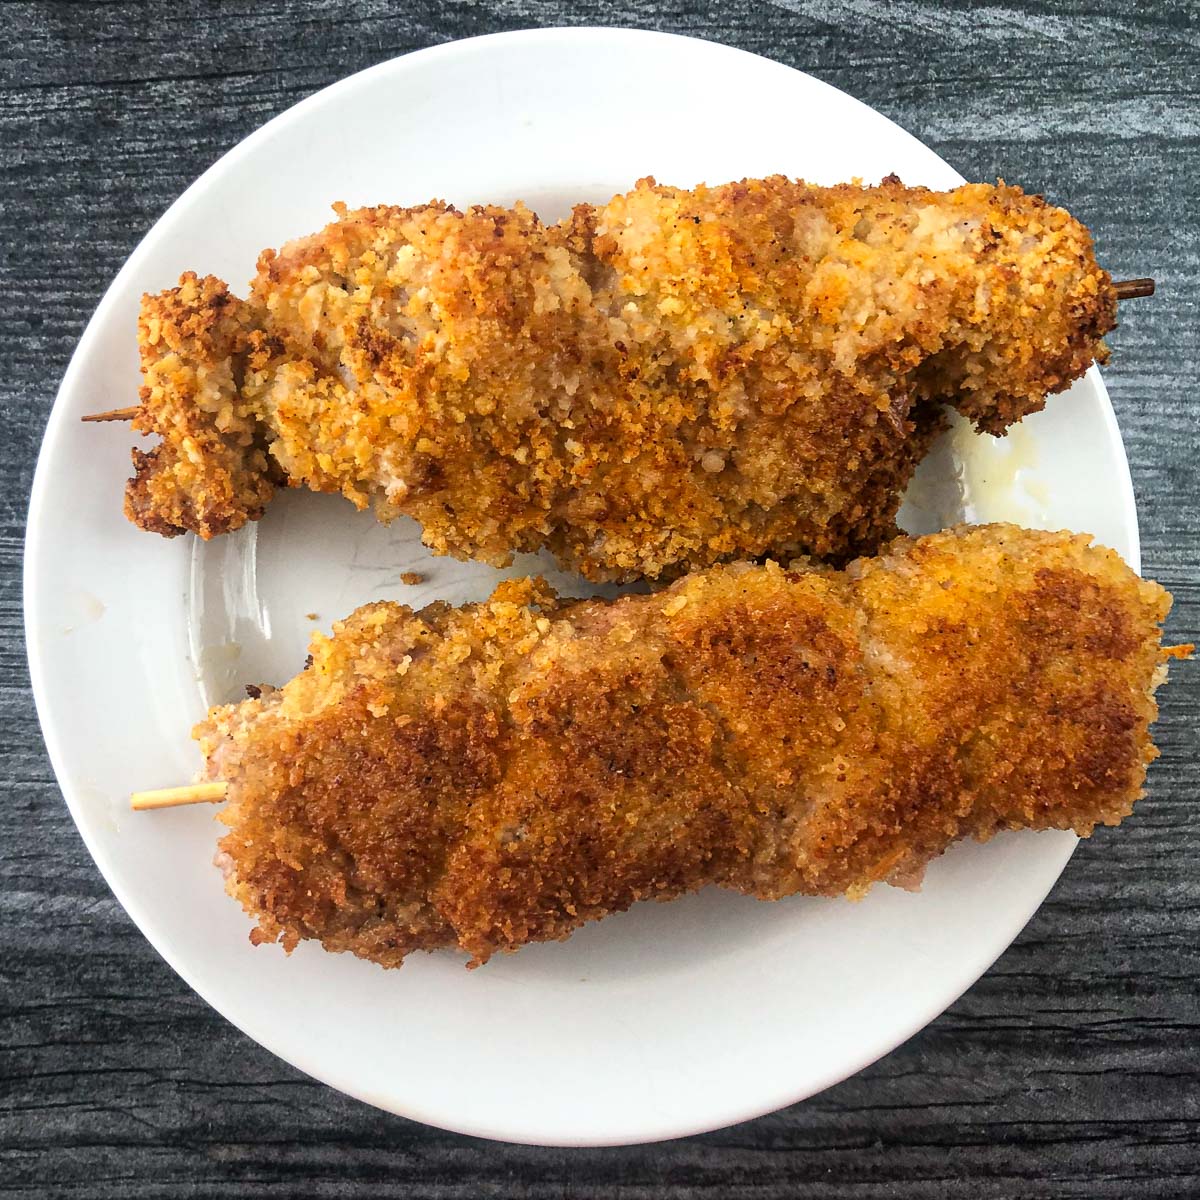 white plate with 2 pieces of chicken from the city on skewers